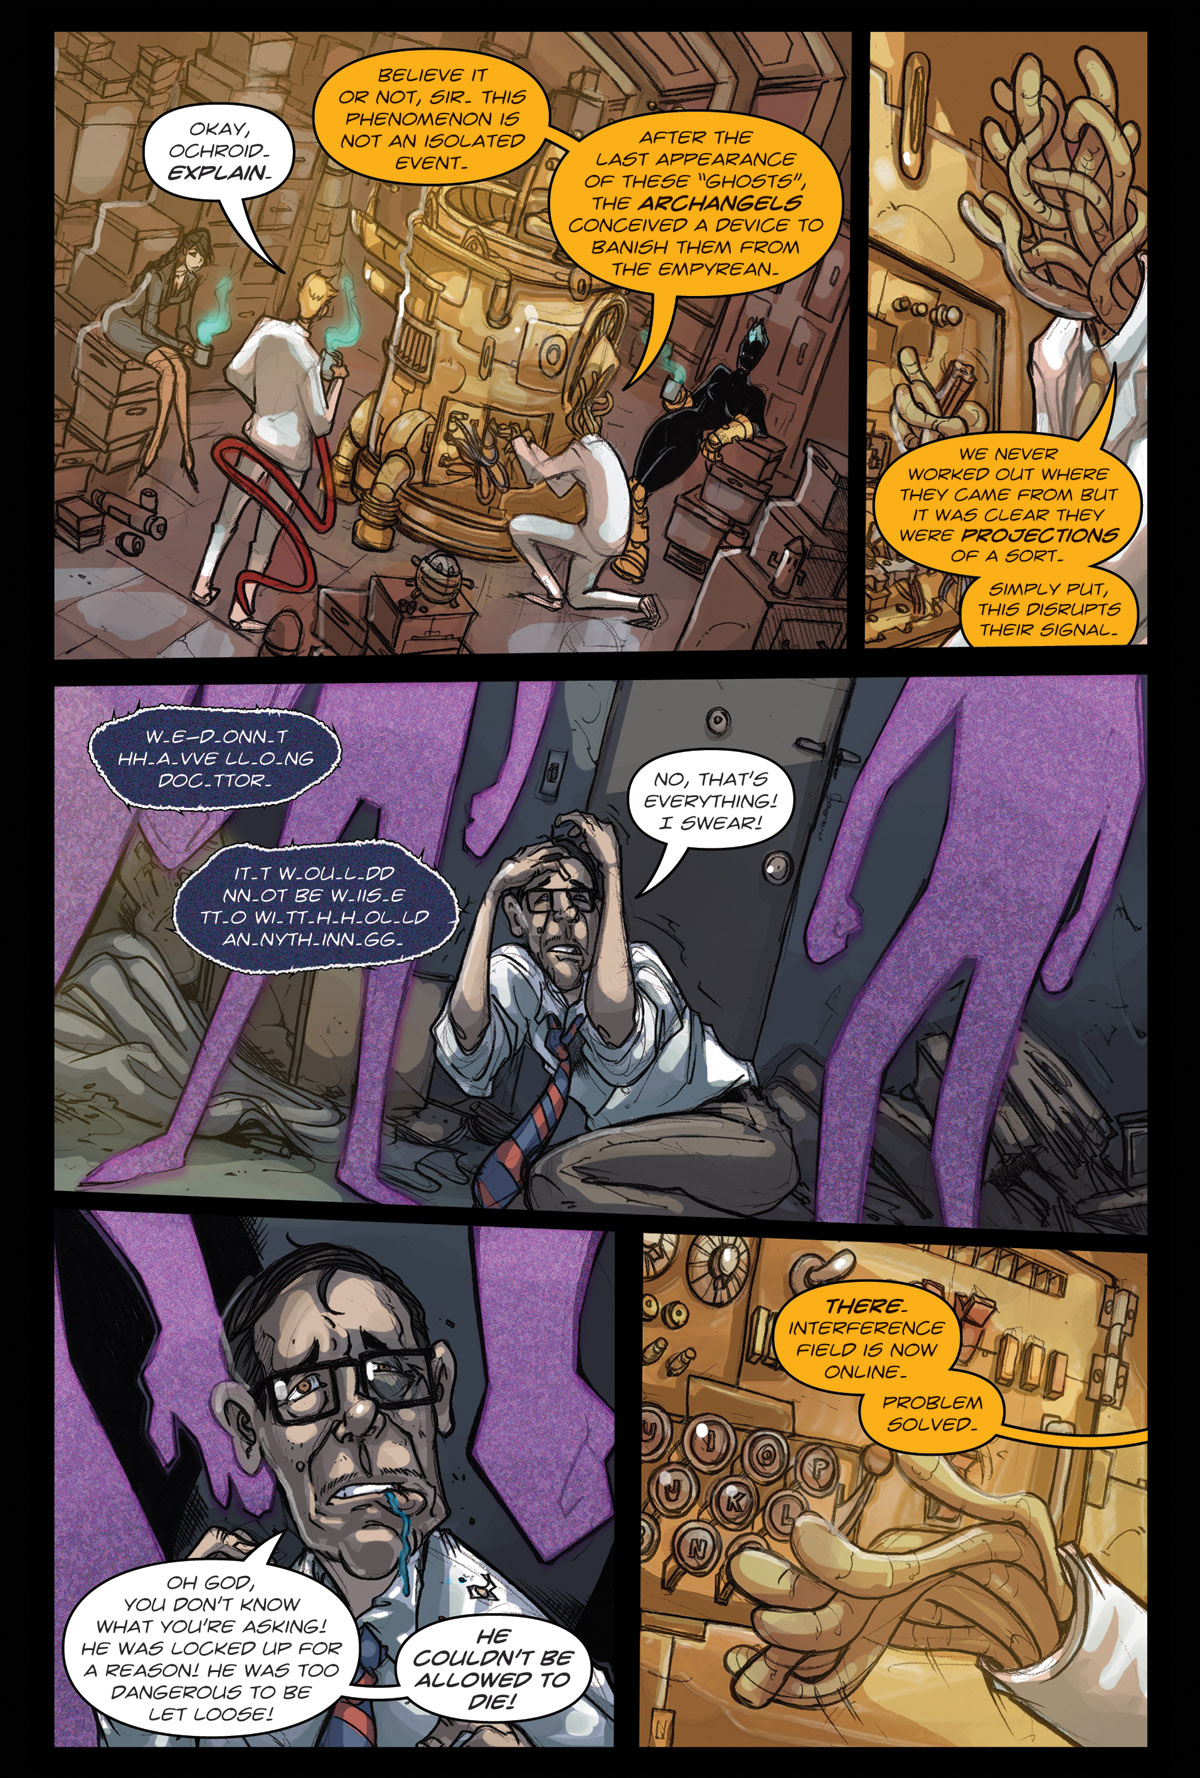 Afterlife Inc. | Near Life | Page 5